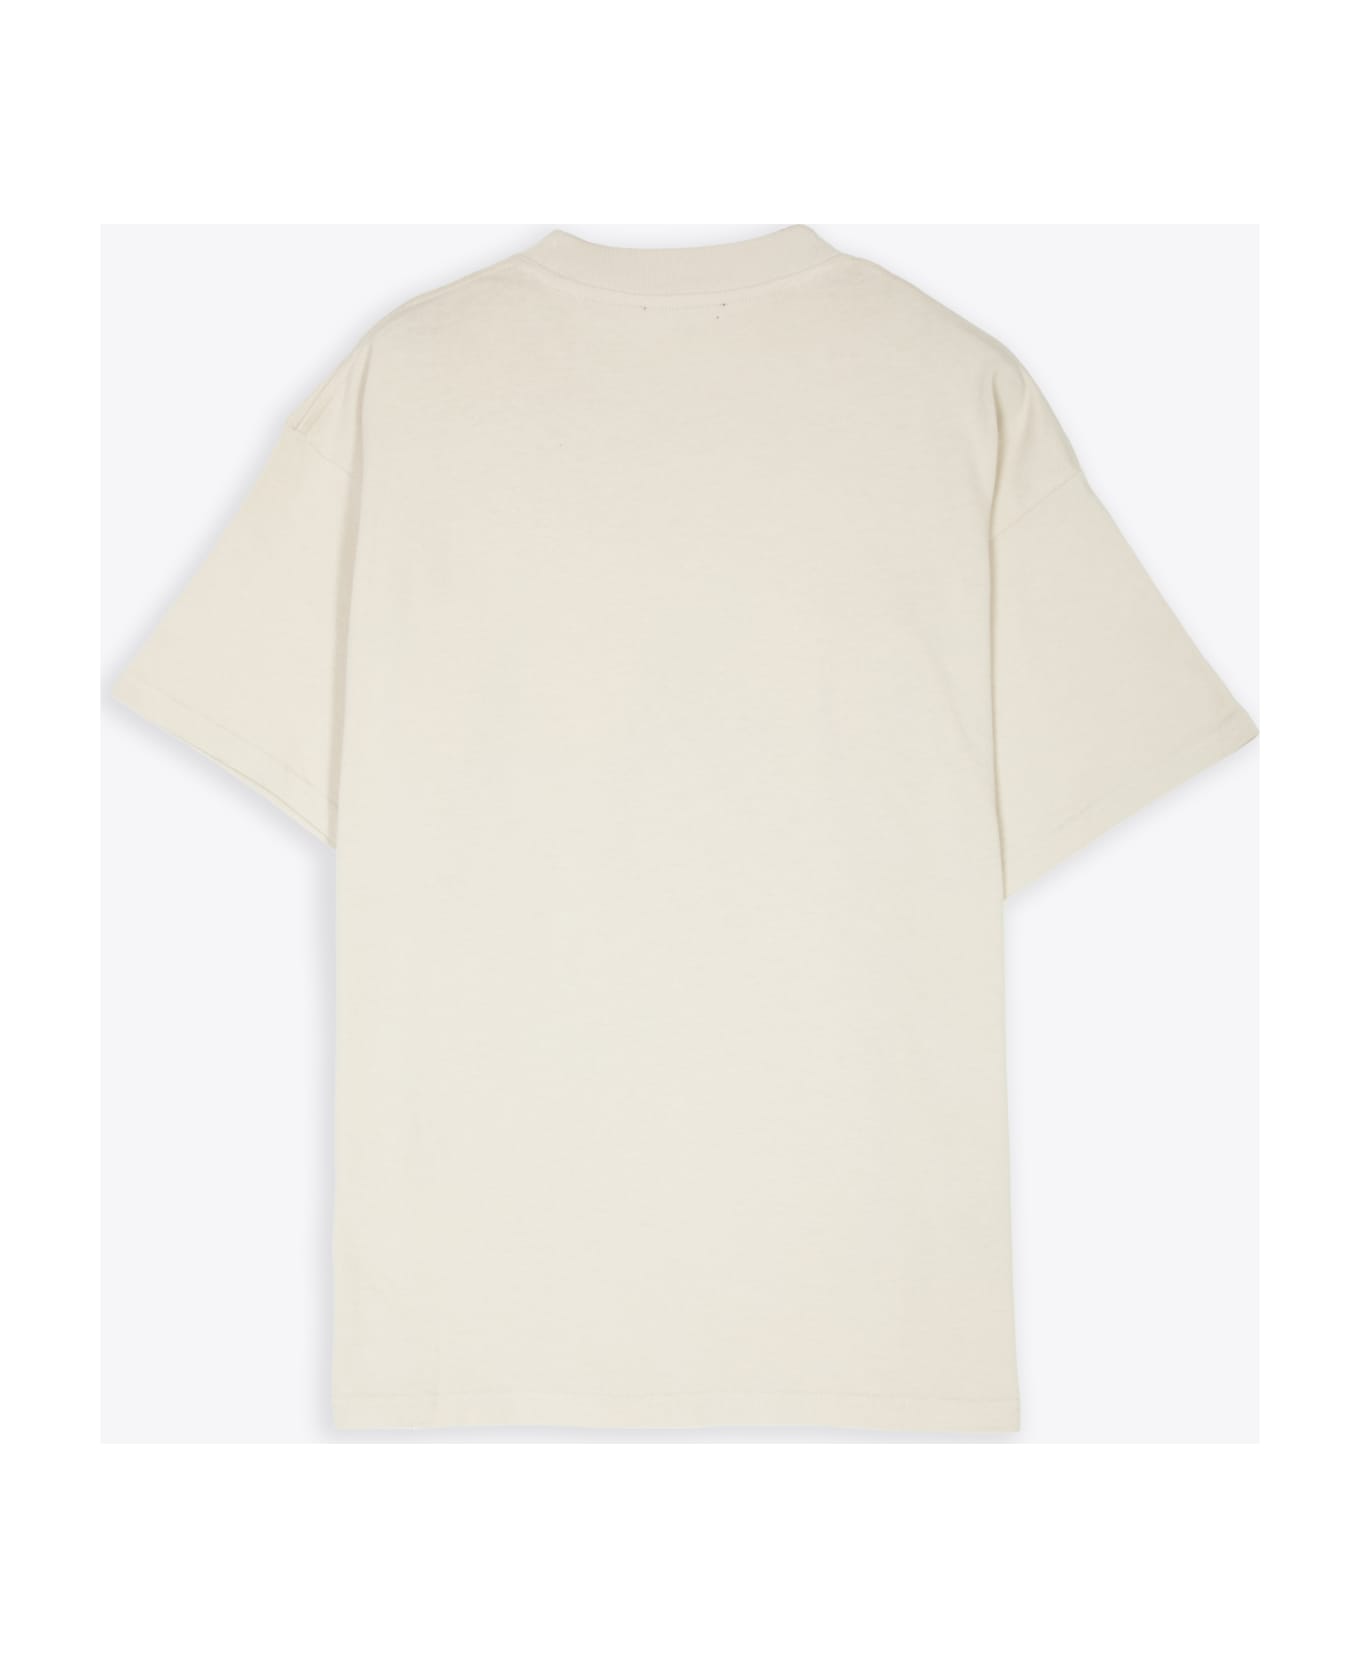 REPRESENT Horoughbred T-shirt Off white t-shirt with graphic print - Horoughbred T-shirt - Crema シャツ